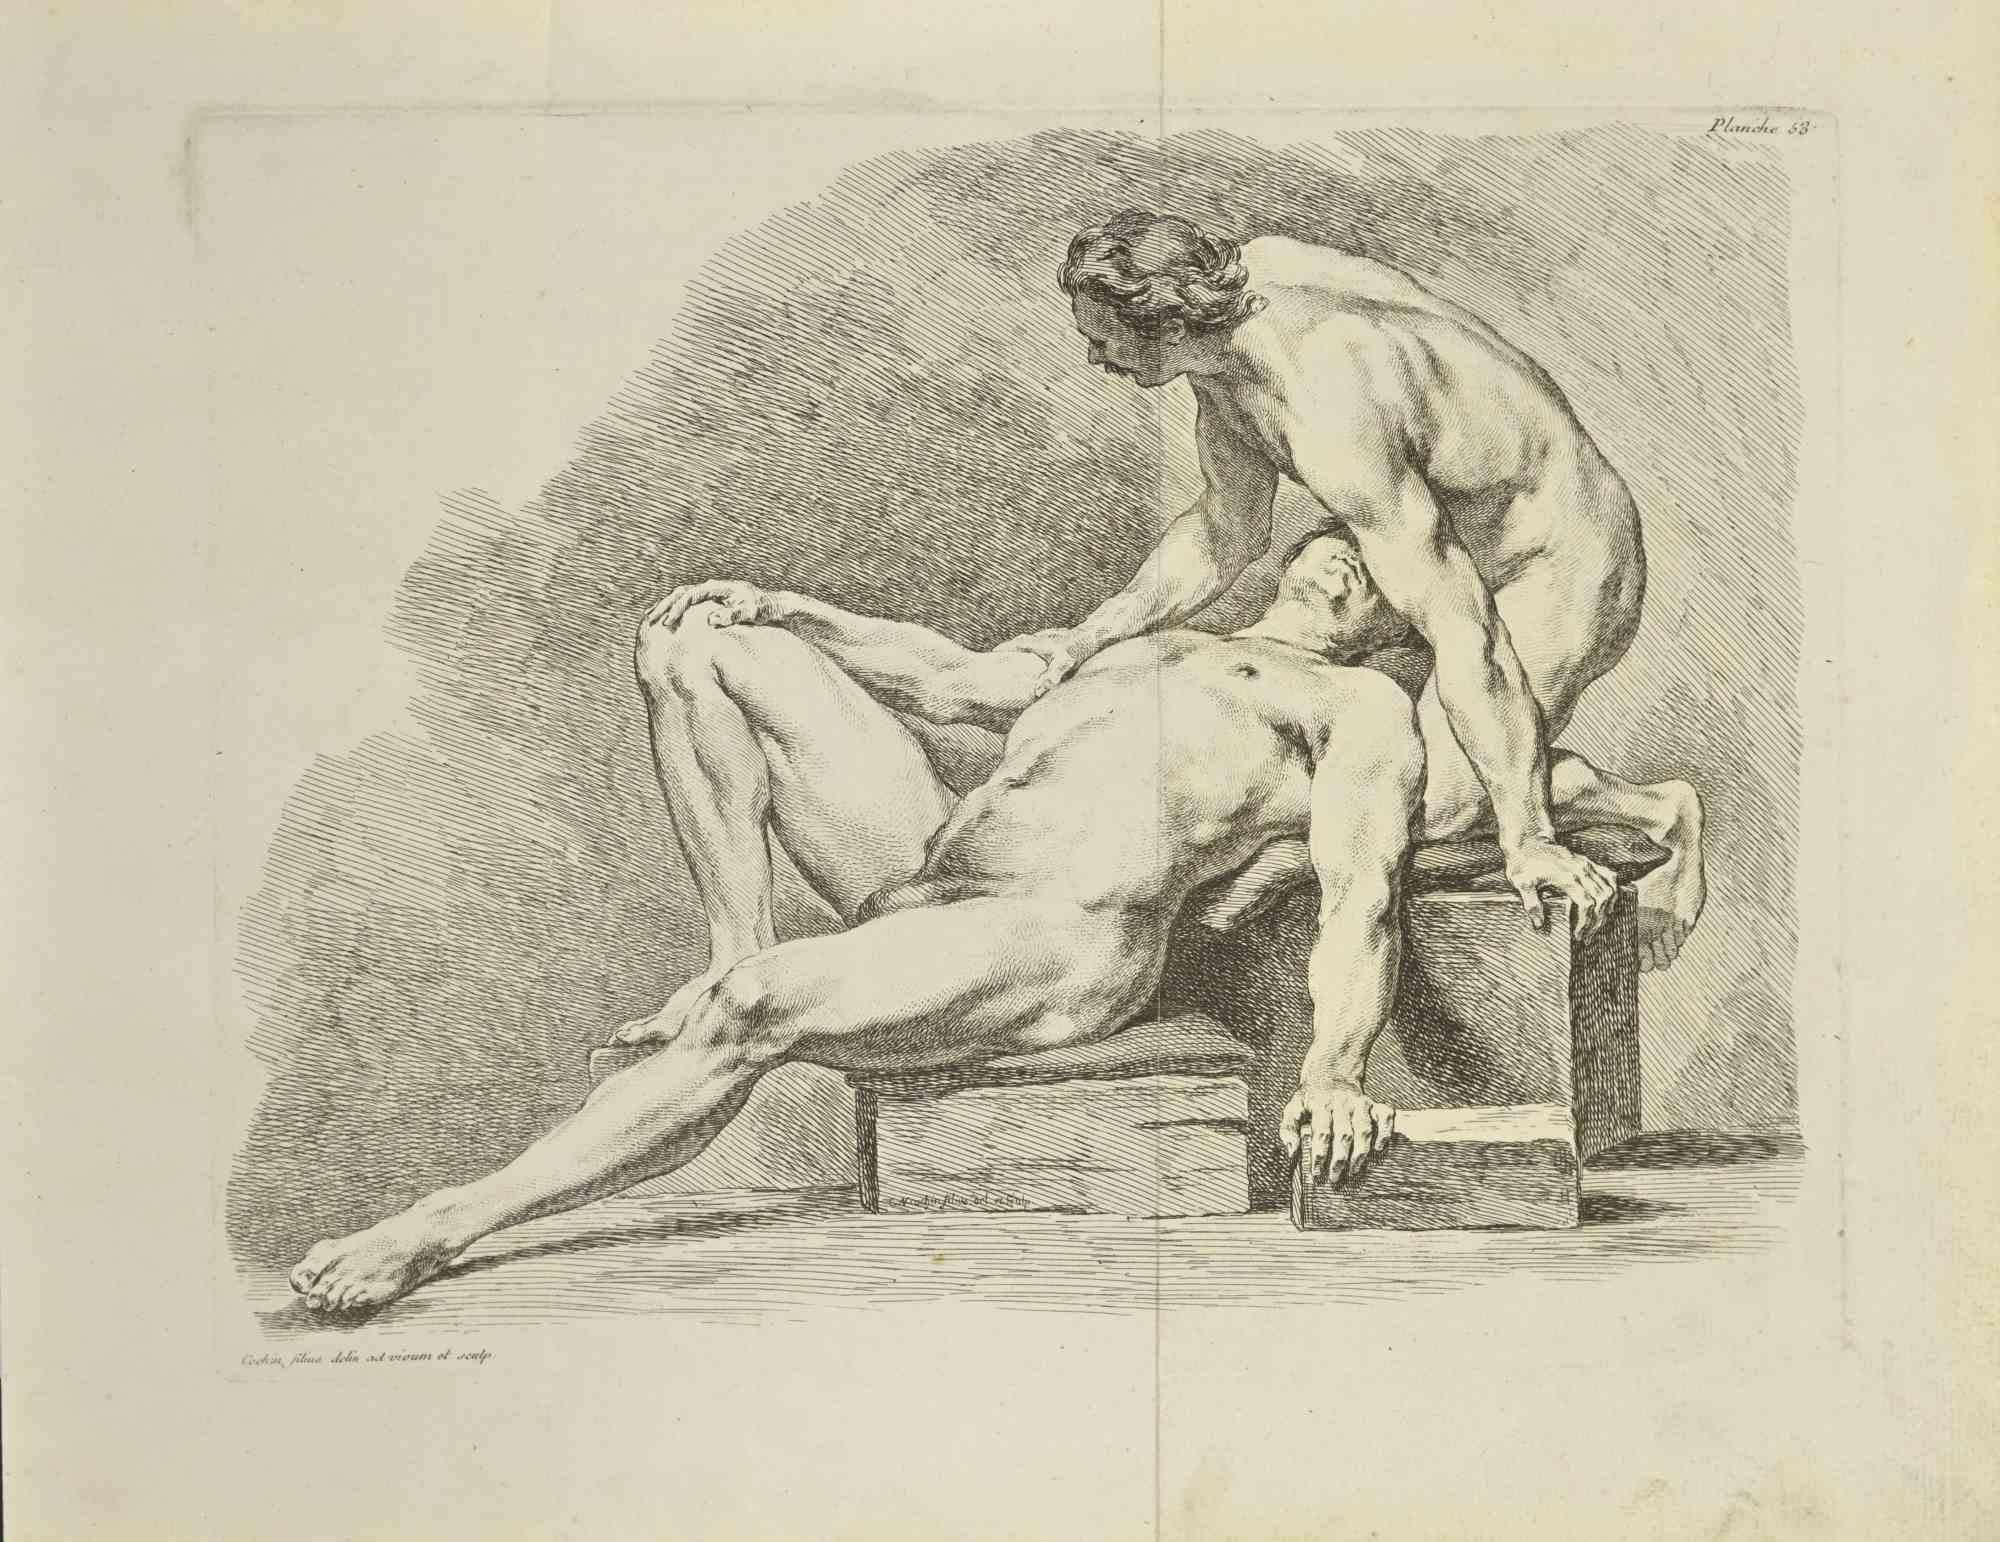 Two Nude Men is an etching realized by Nicholas Cochin in 1755.

Signed on the plate.

Good conditions with central folding.

The artwork is depicted through confident strokes.